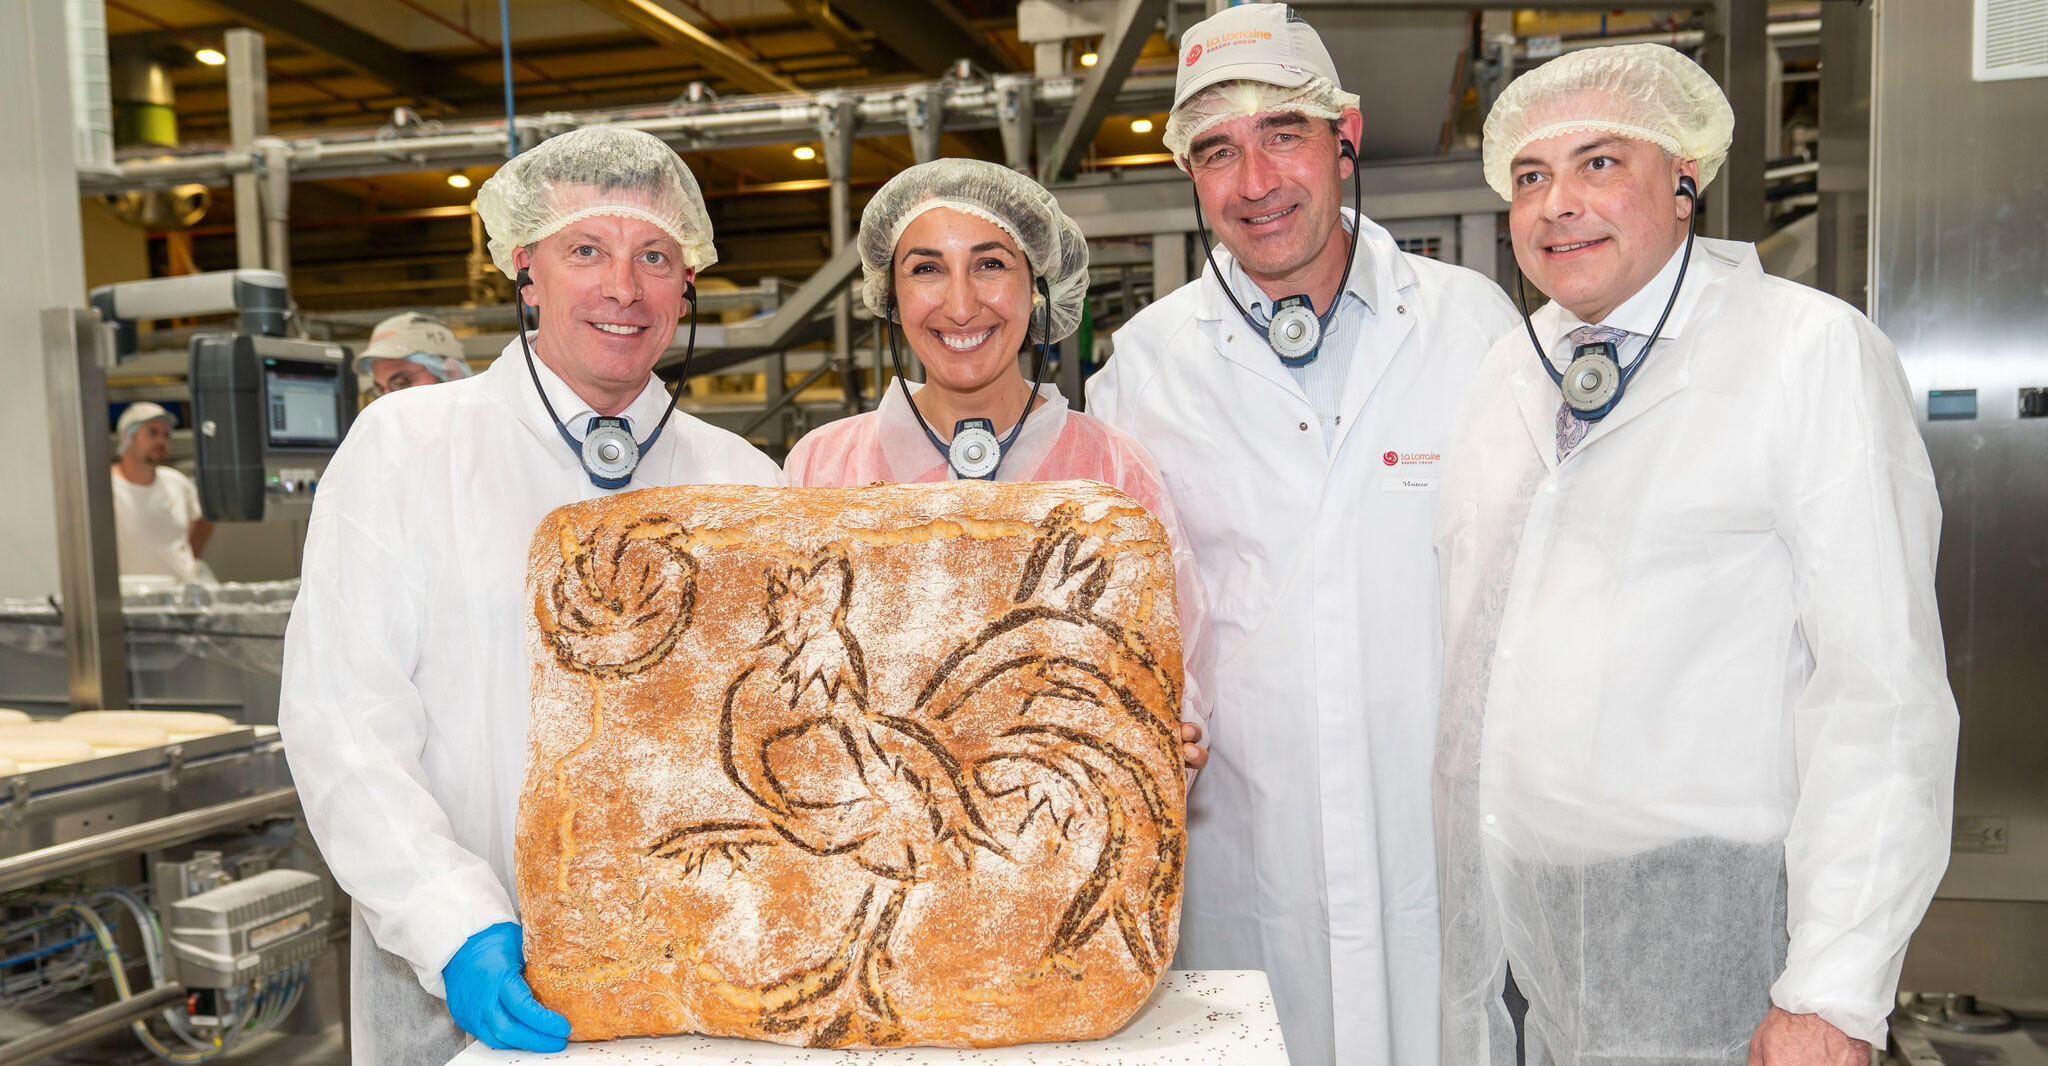 La Lorraine Bakery Group invests 20 million euros in new production line in Barchon